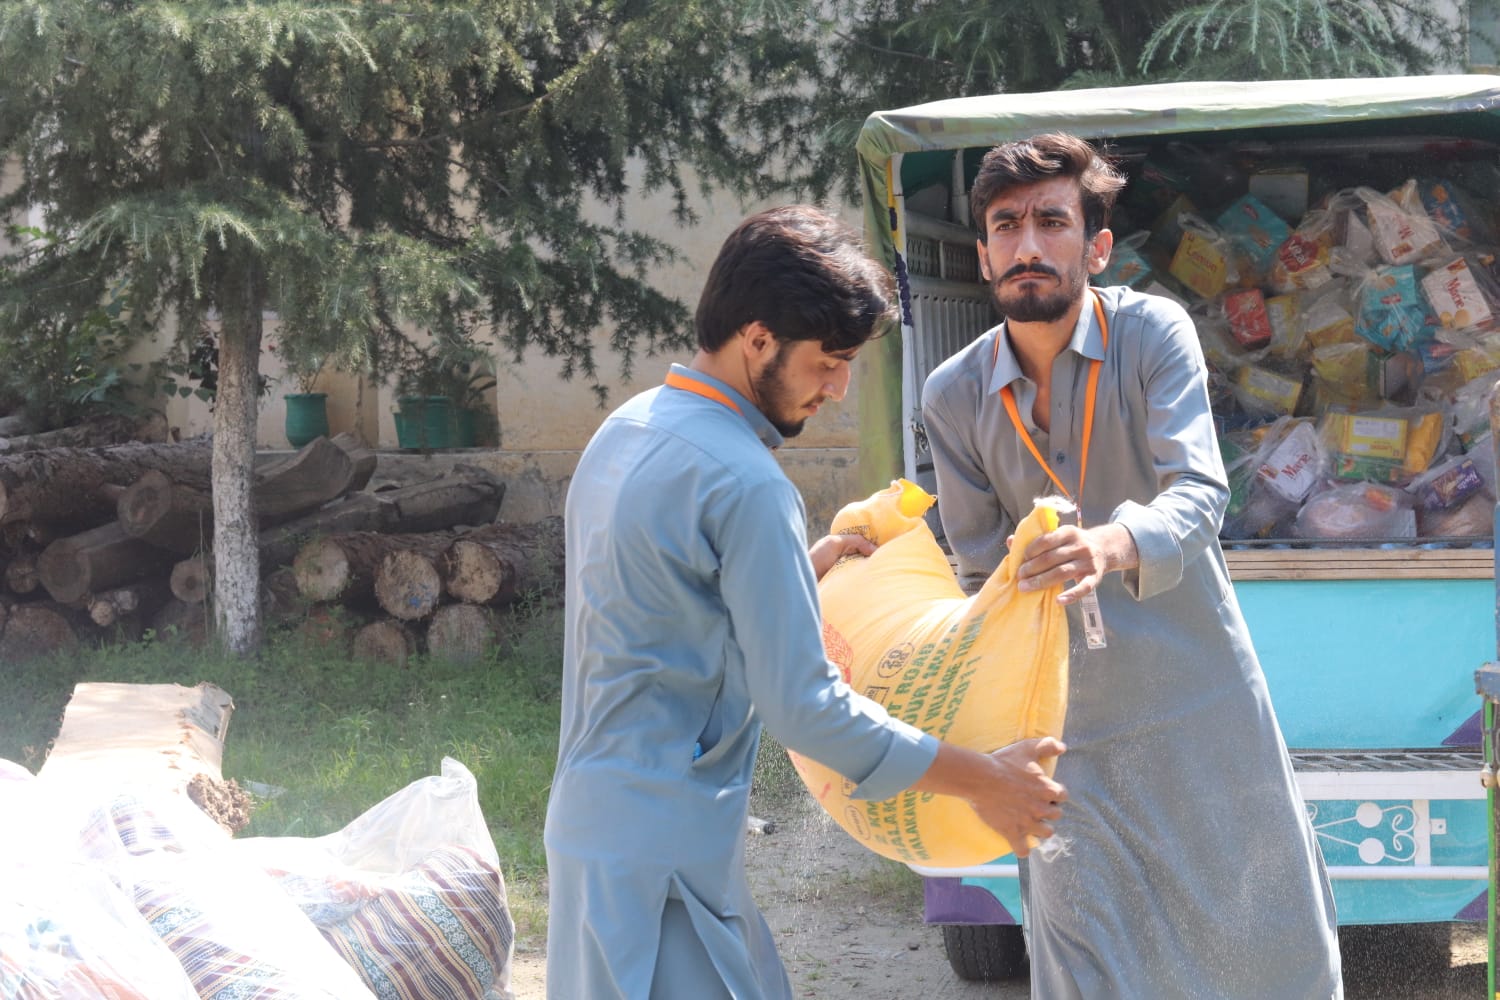 Members of Green Youth Movement Club at University of Malakand collected and provided aid to people from flood effected areas.